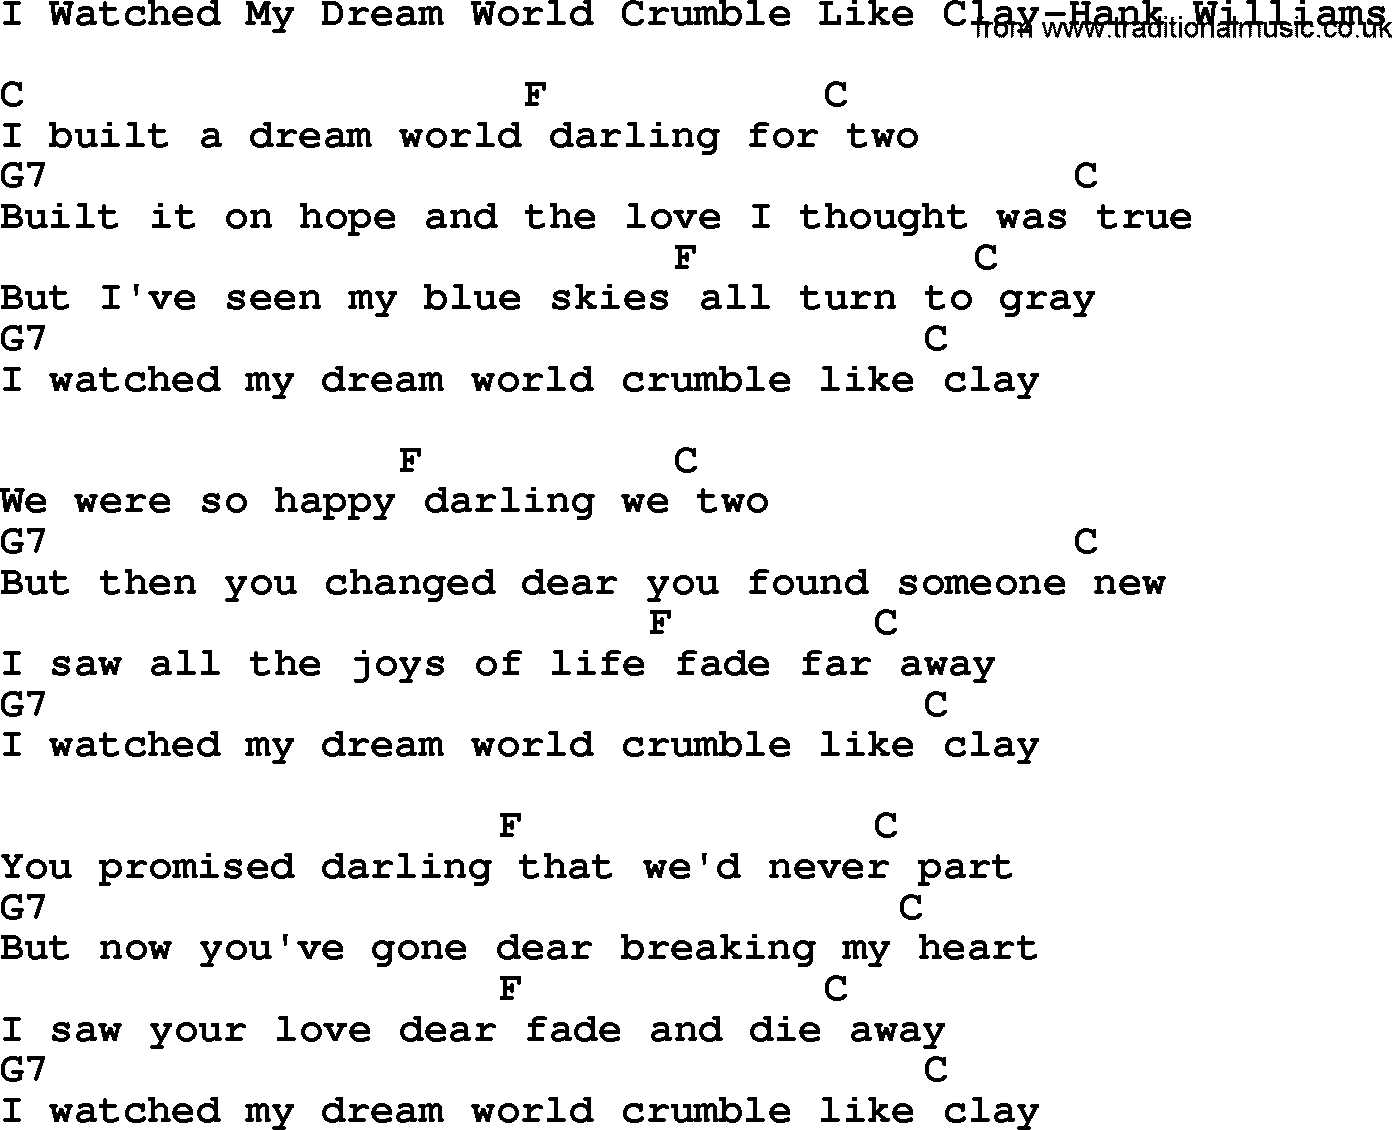 Country music song: I Watched My Dream World Crumble Like Clay-Hank Williams lyrics and chords